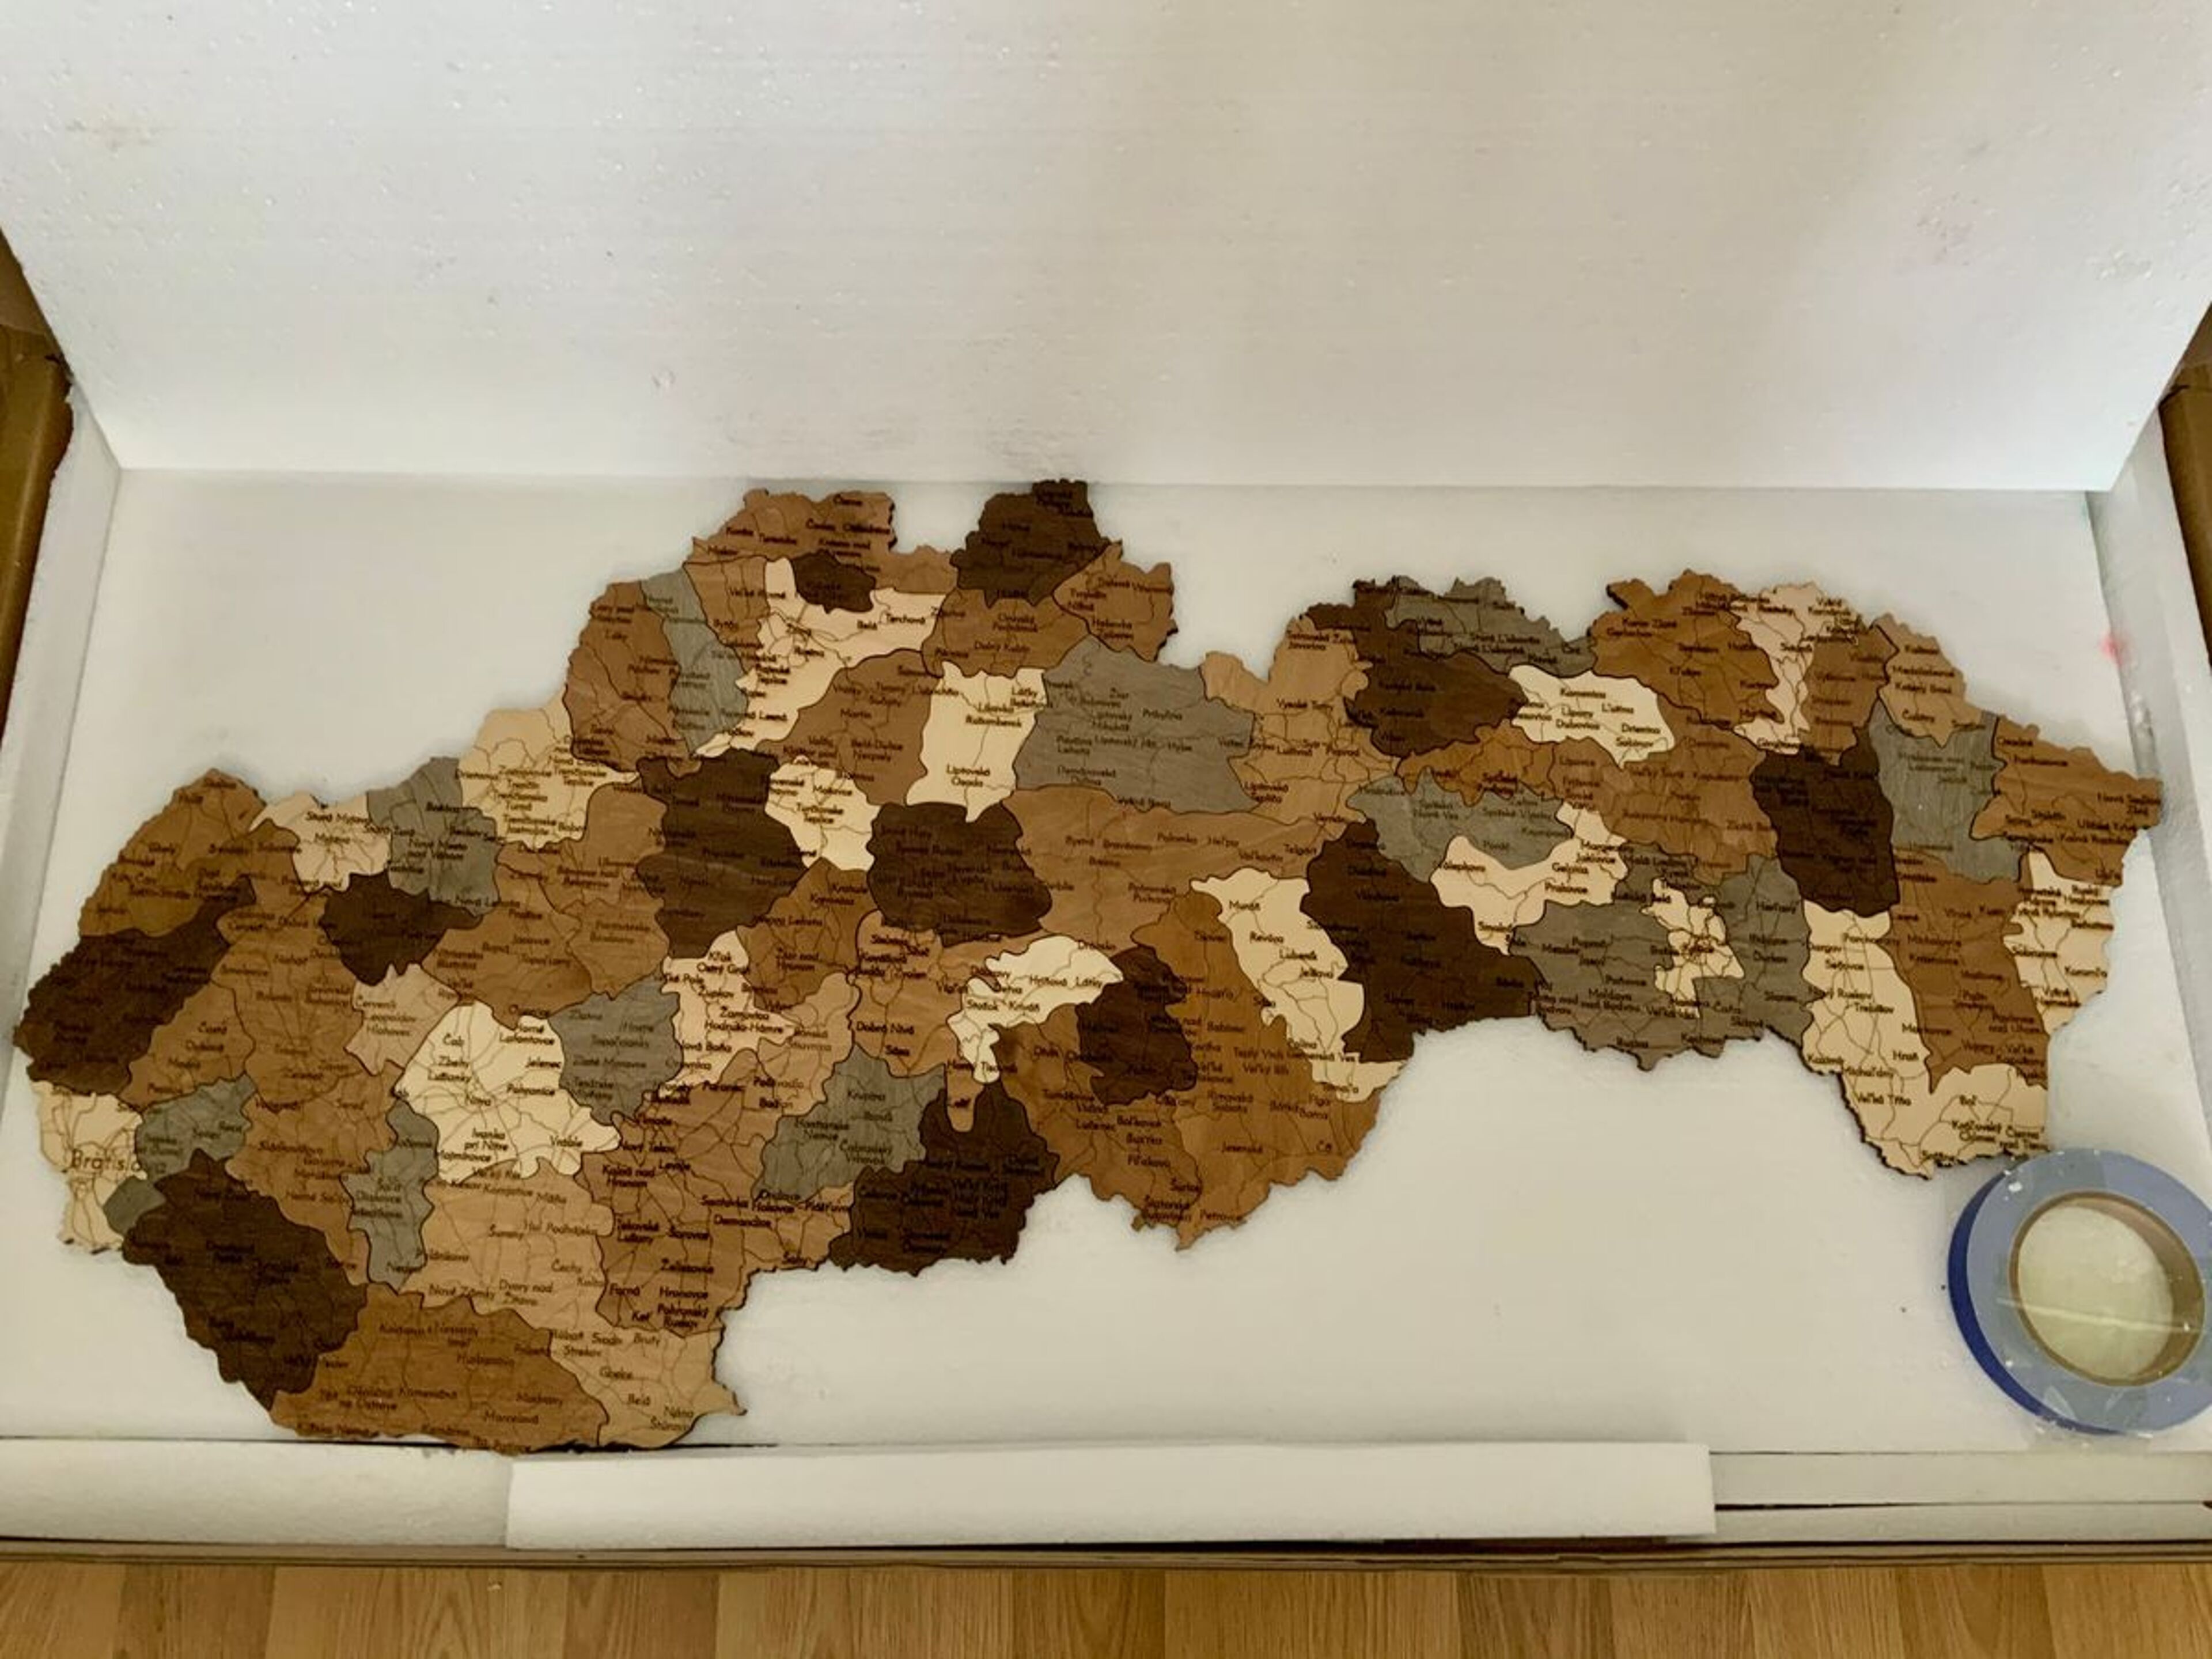 Review for Wooden Map of Slovakia - image from Michal B.